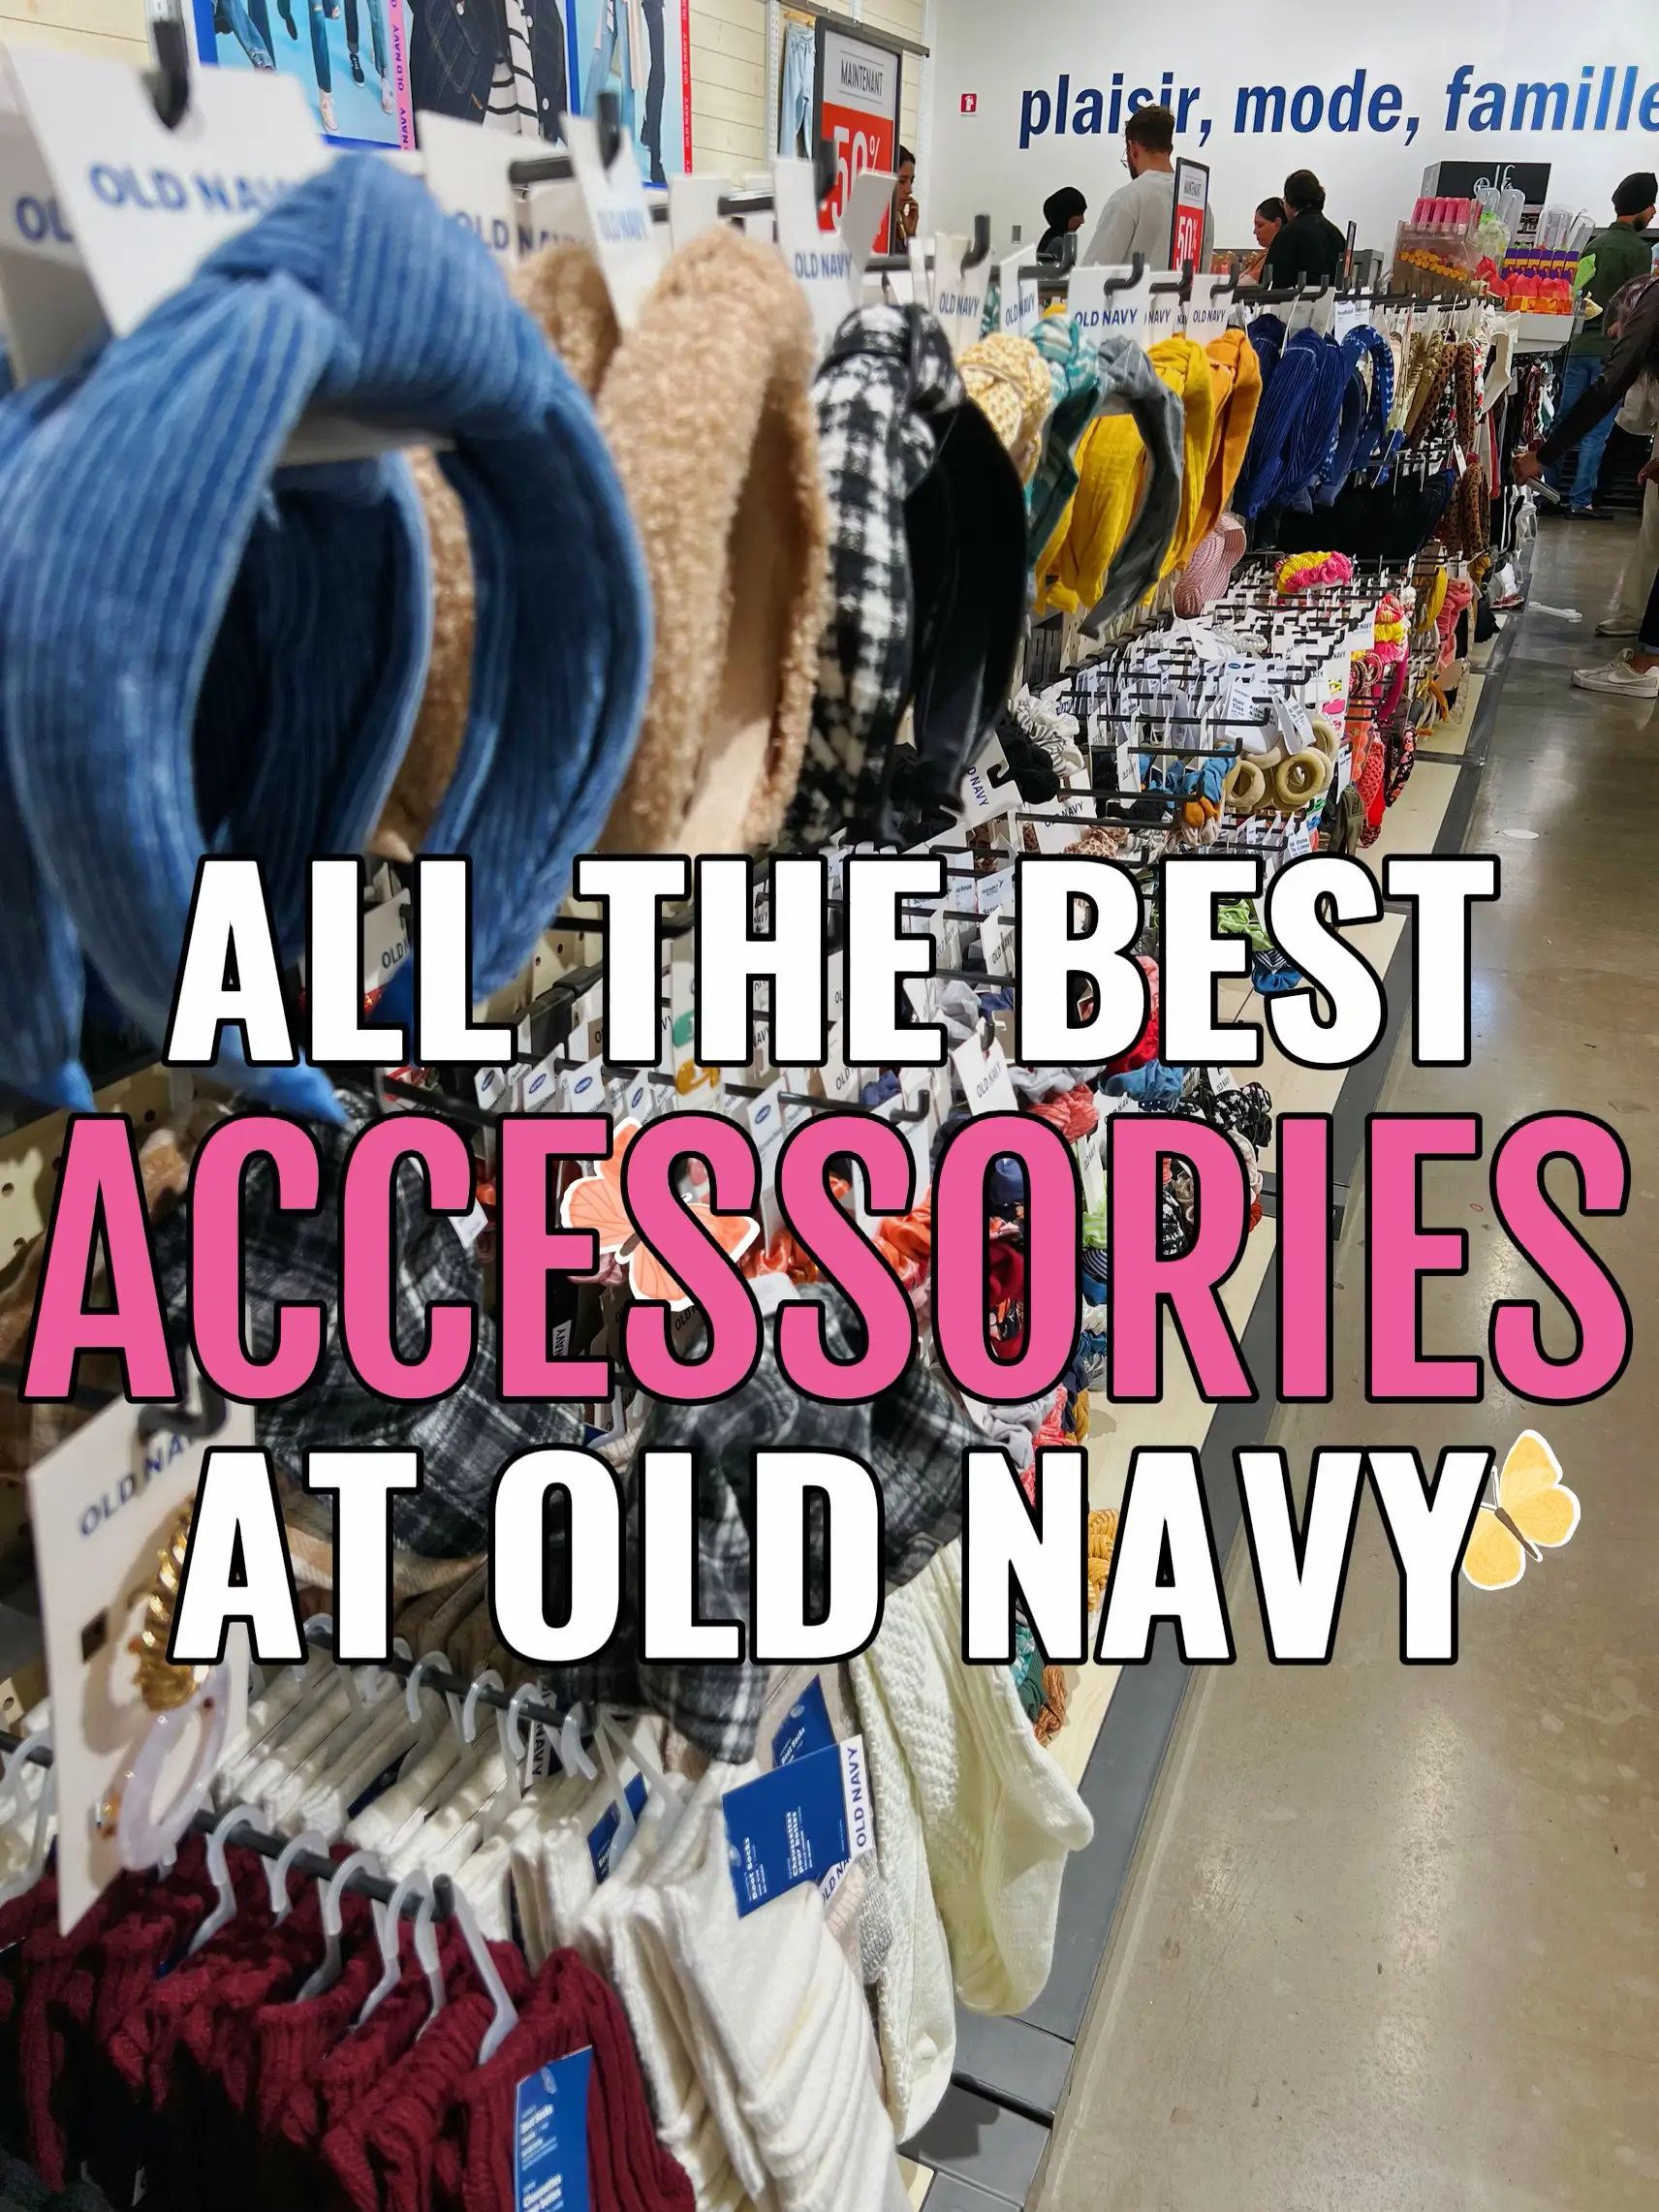 Accessories at Old Navy🎀✨, Gallery posted by roni berger